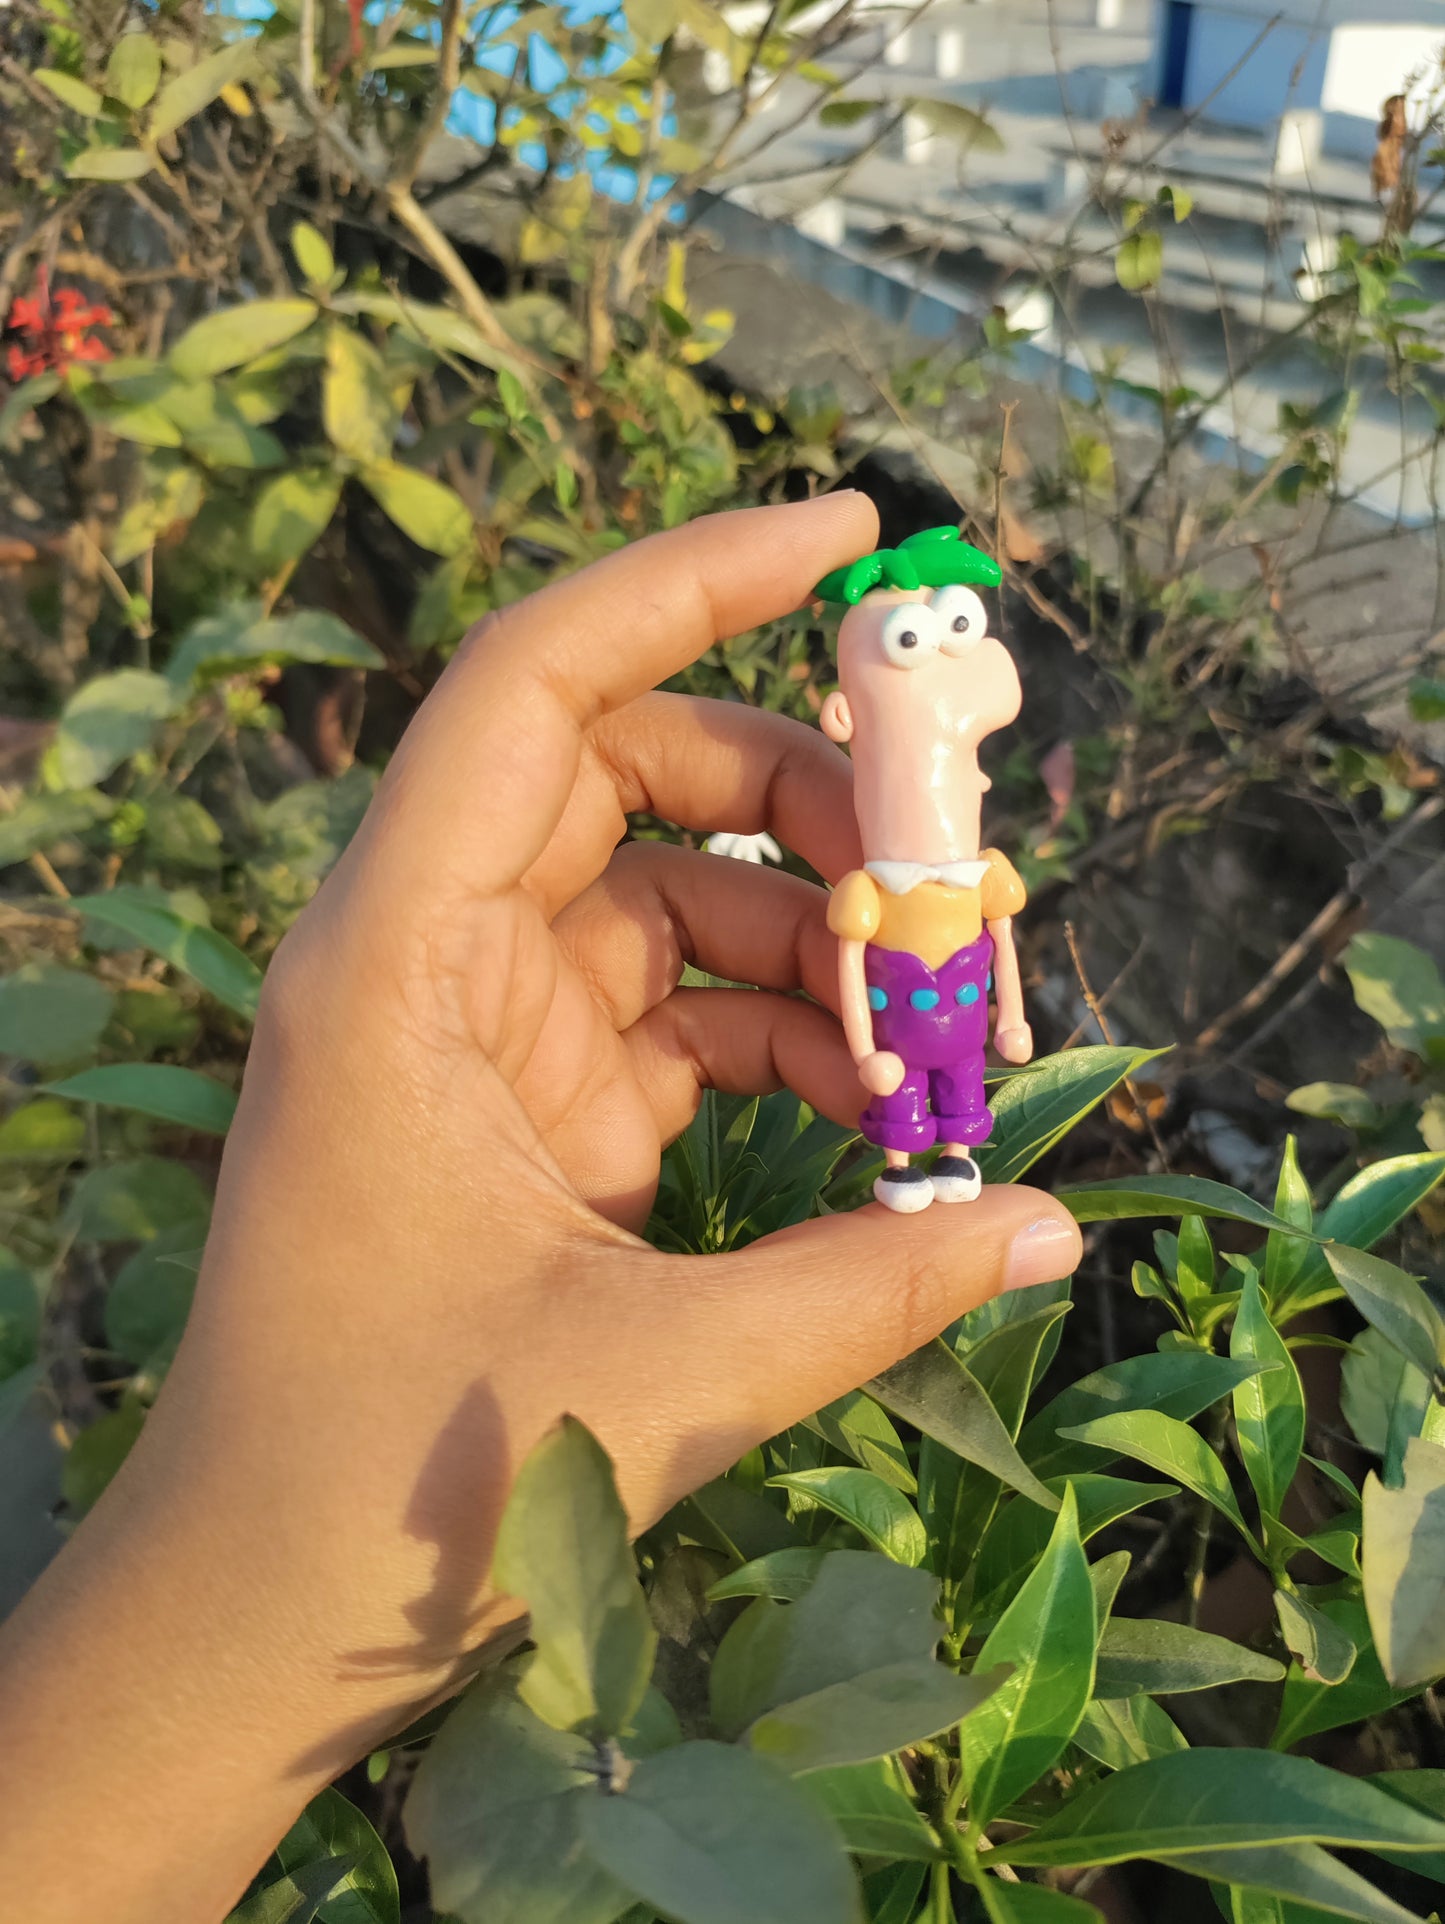 Phineas and Ferb figures, dolls